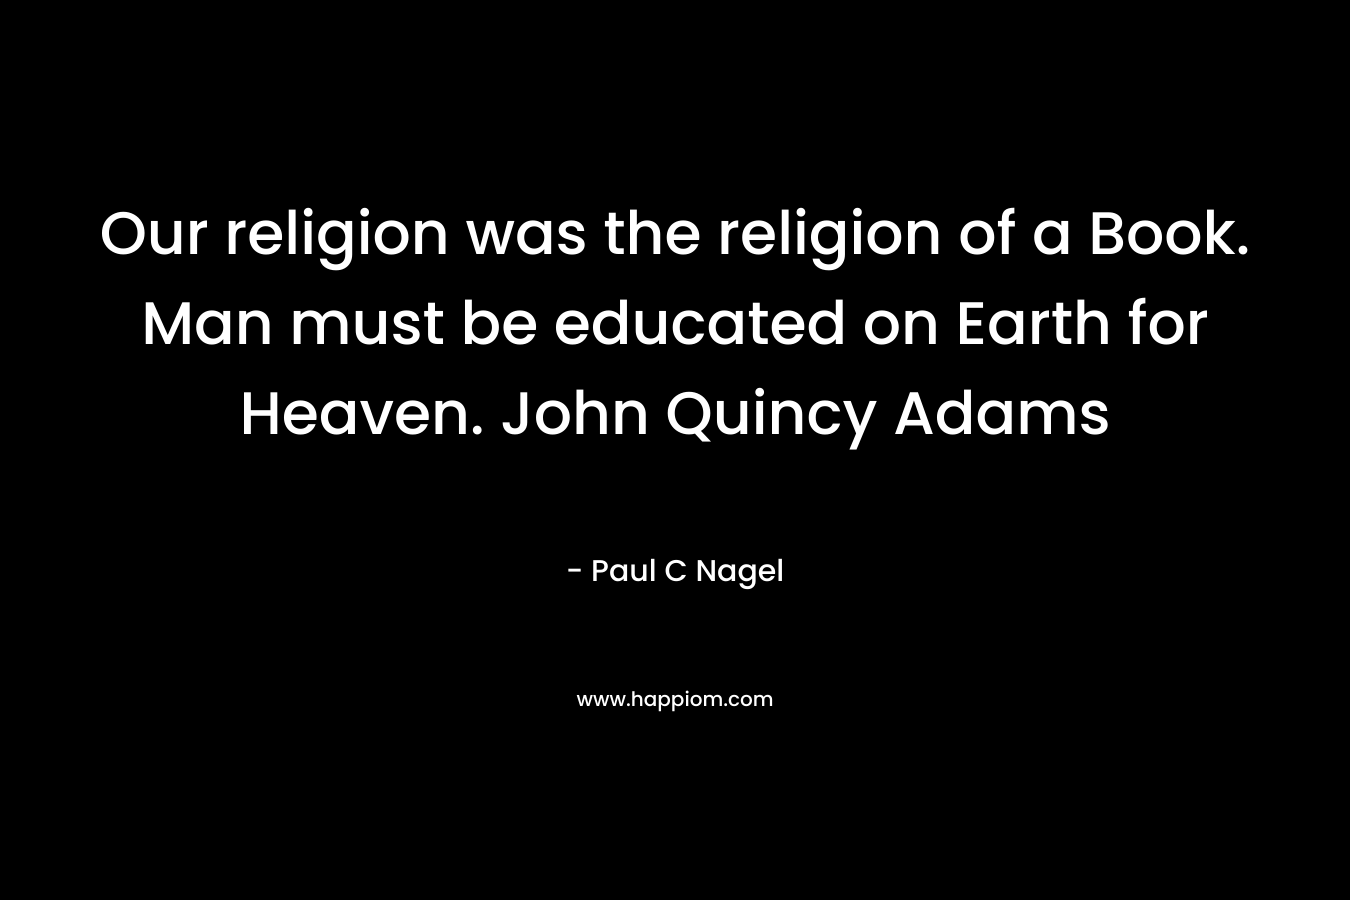 Our religion was the religion of a Book. Man must be educated on Earth for Heaven. John Quincy Adams